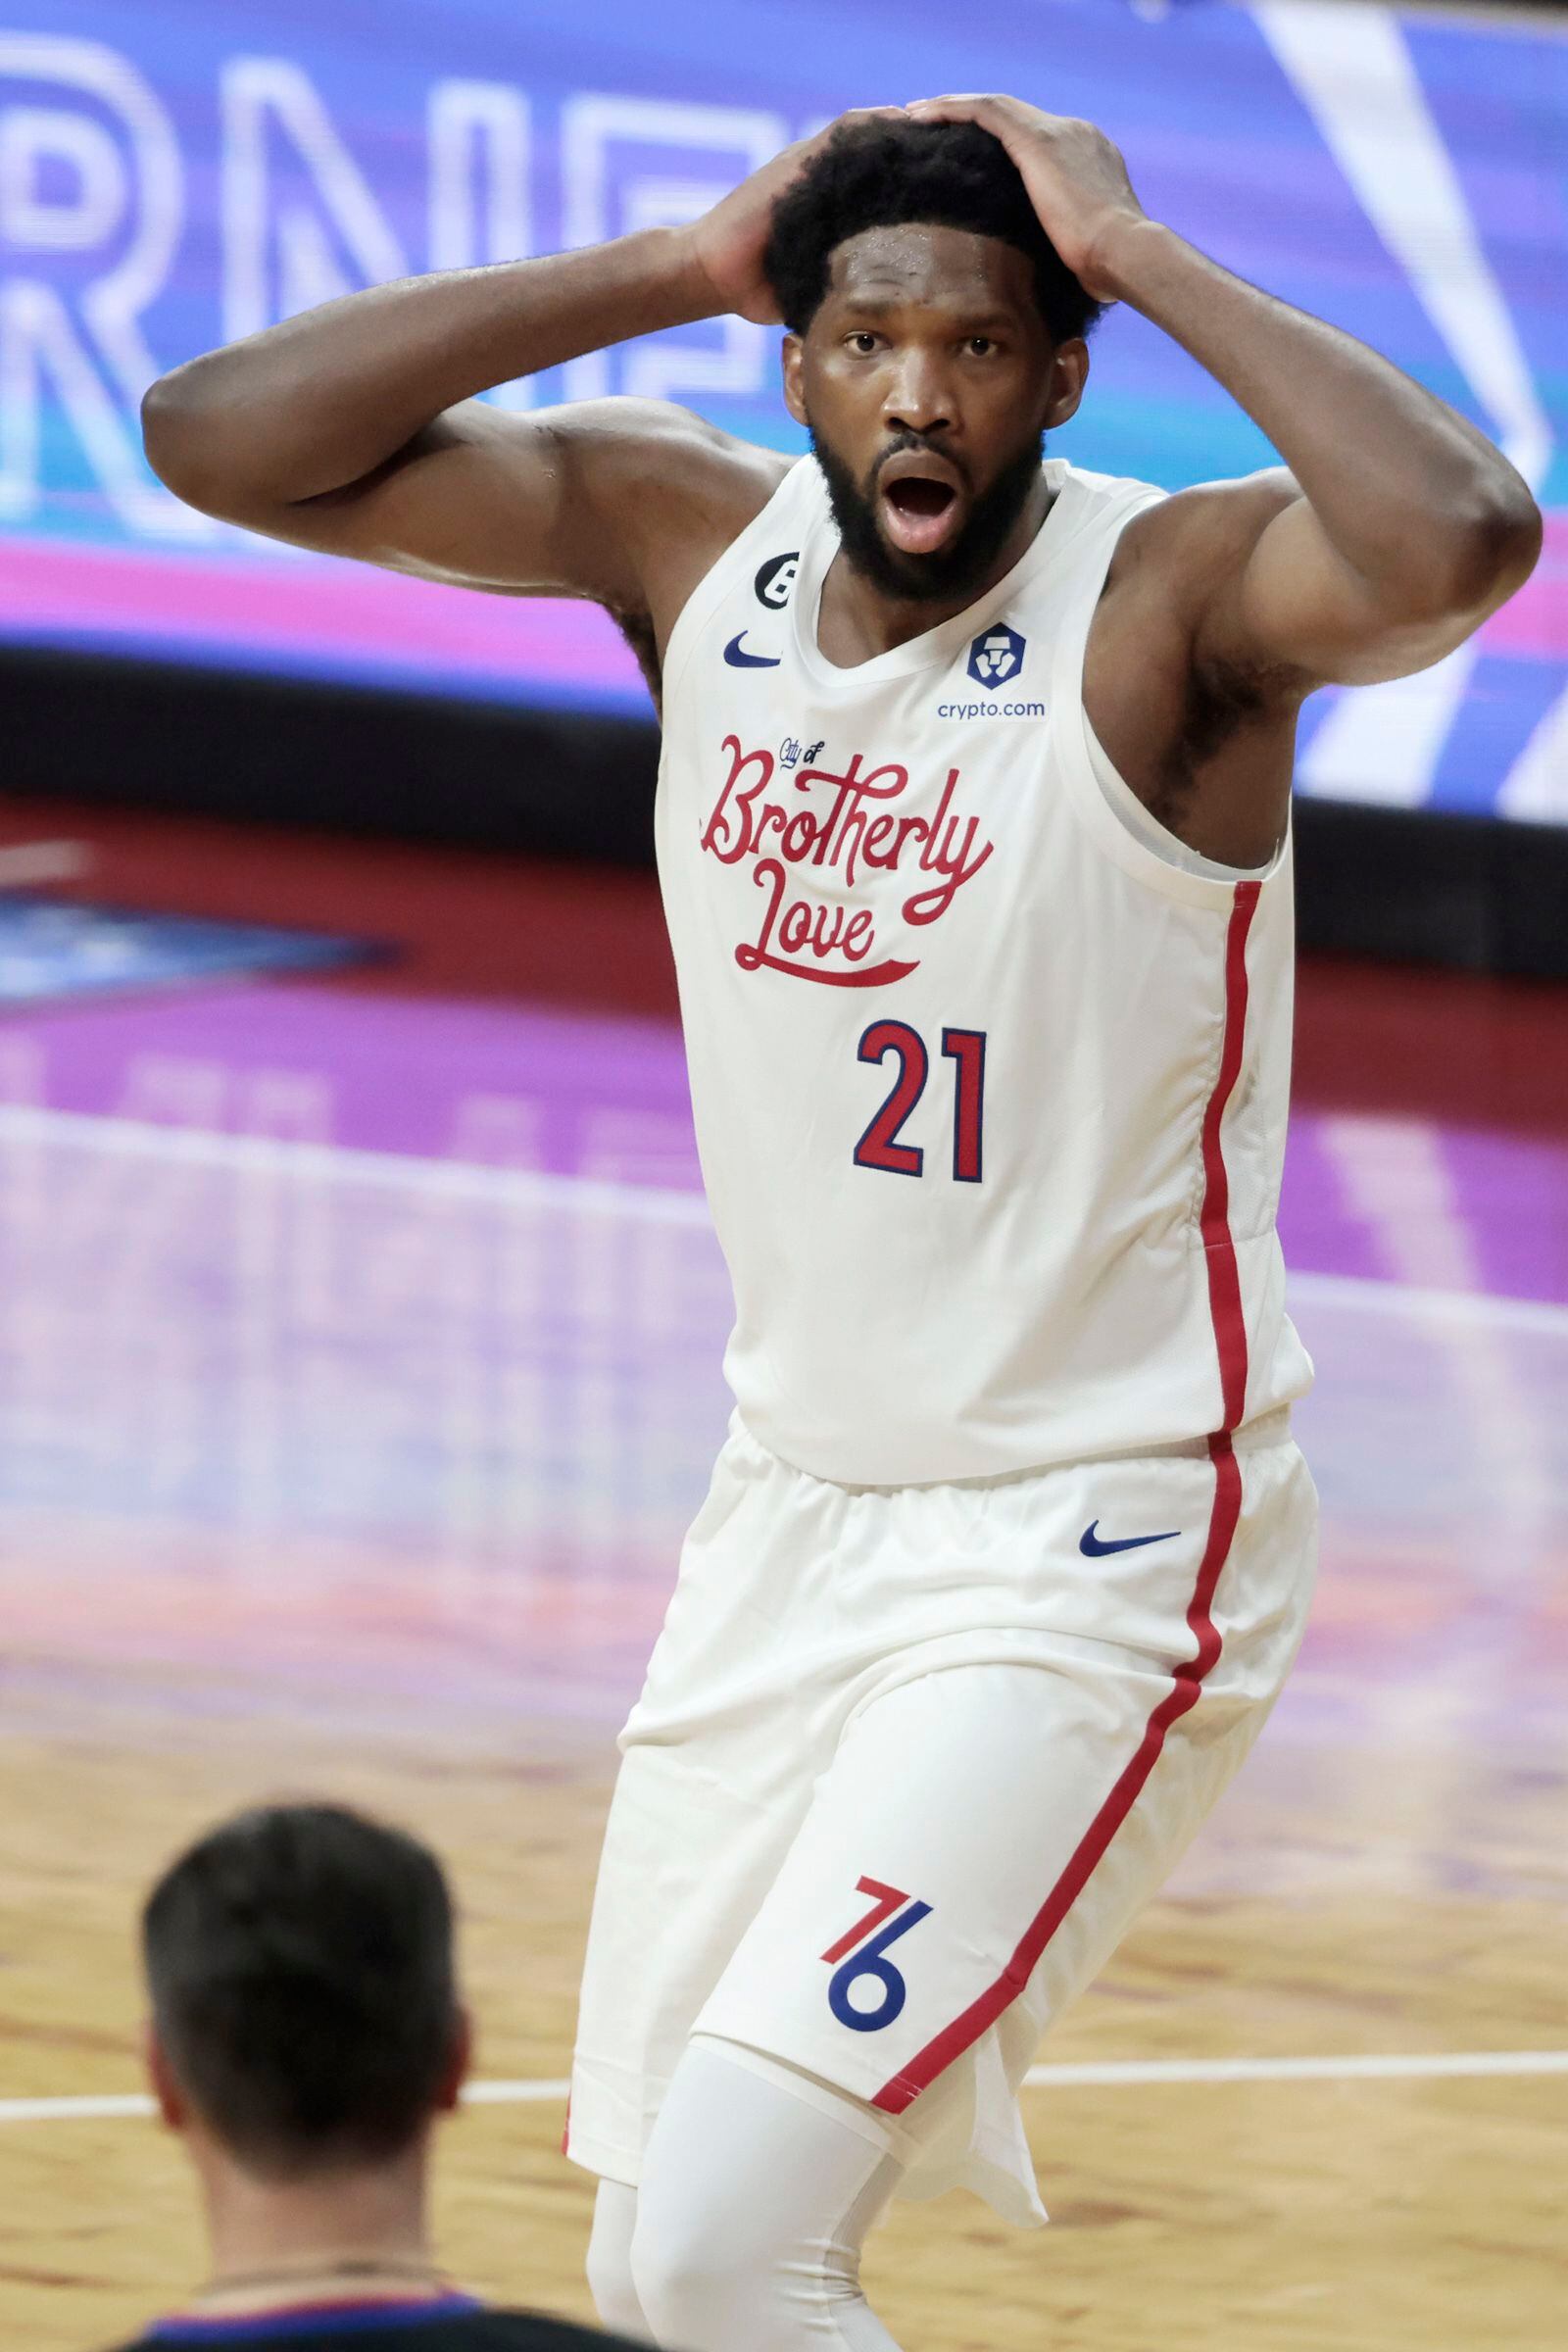 NBAAllStar on X: Making his 6th #NBAAllStar appearance Joel Embiid of  the @sixers. Drafted as the 3rd pick in 2014 out of Kansas (originally from  Cameroon), @JoelEmbiid is averaging 33.5 PPG, 10.1